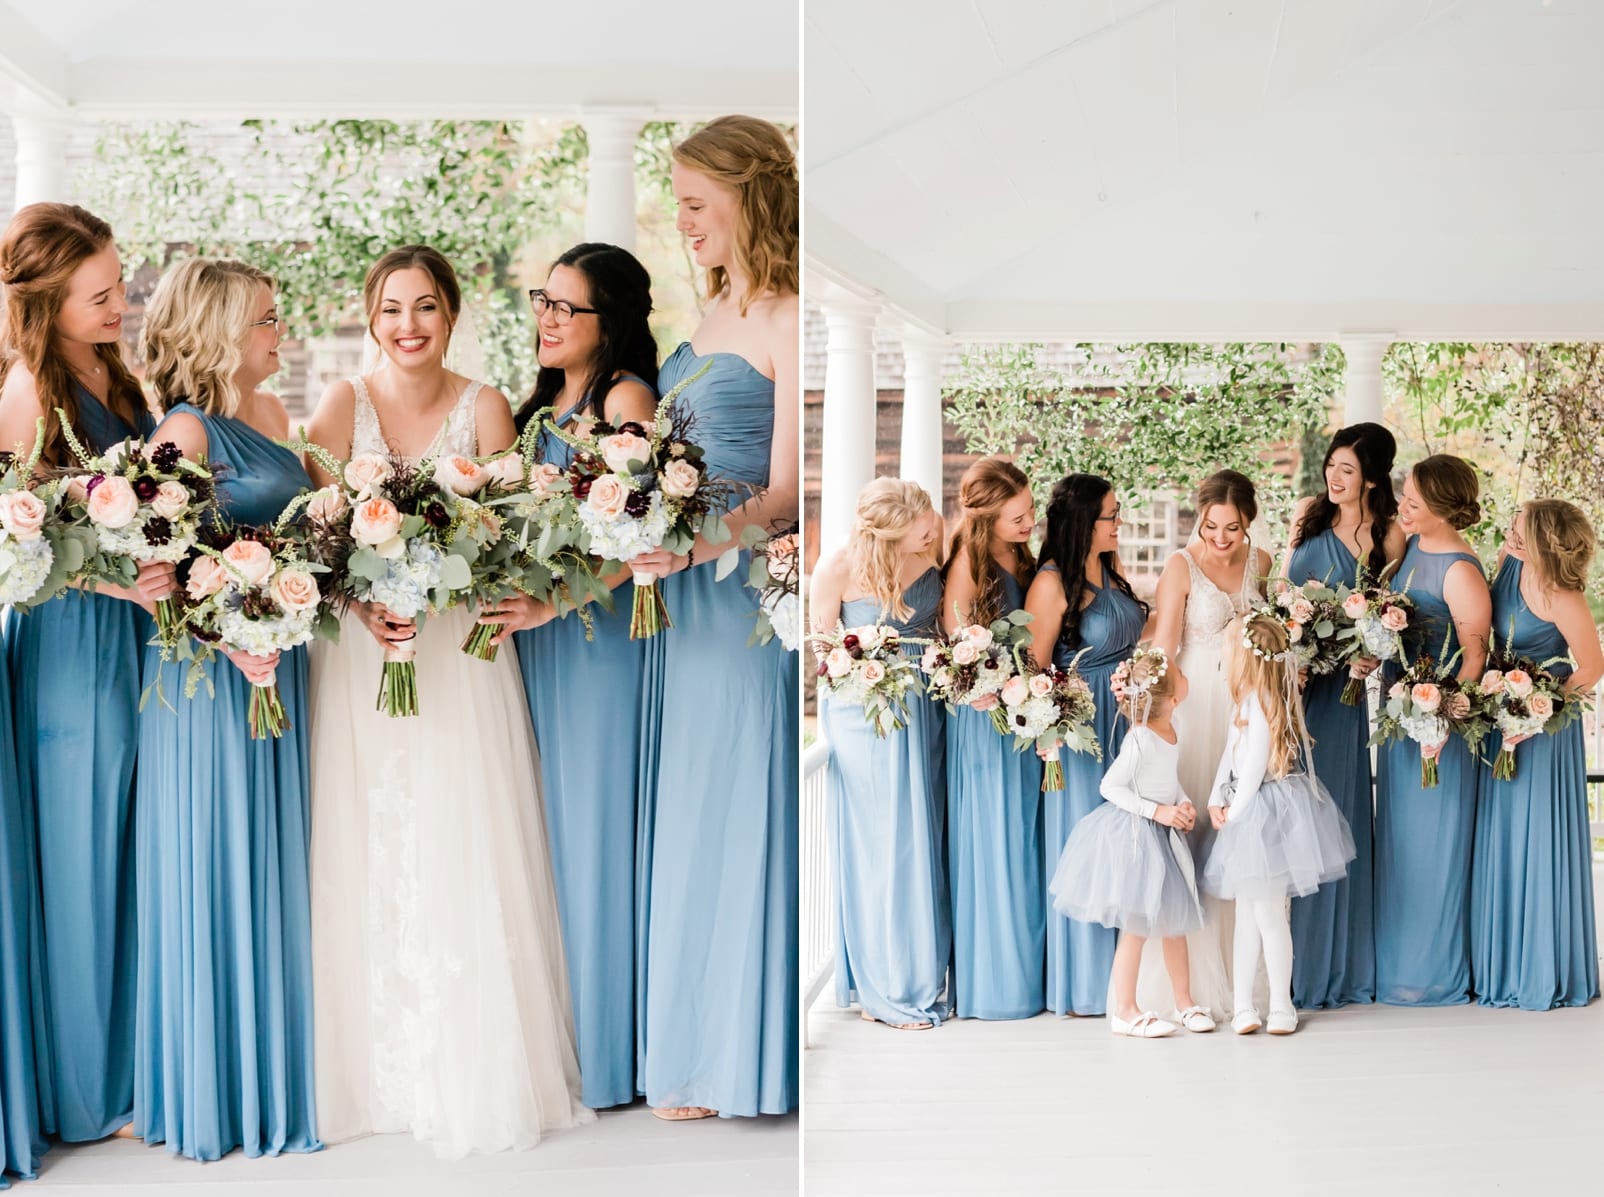 Sutherland Estate bridesmaids and bride standing and laughing together on the front porch photo